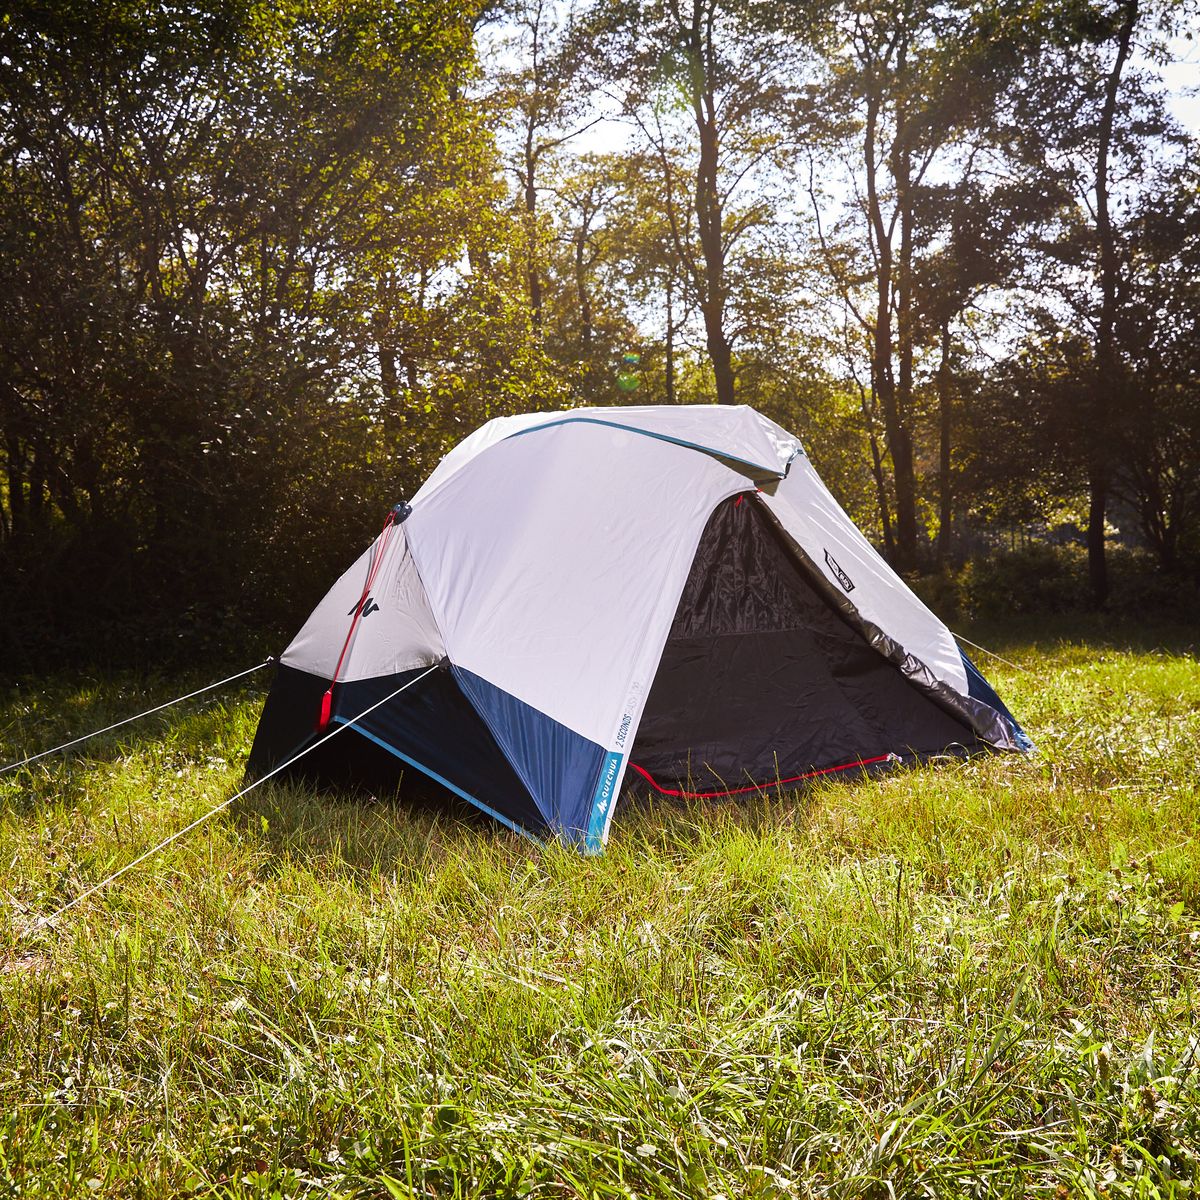 Decathlon 2 Easy Tent Review | Best Camping Tents